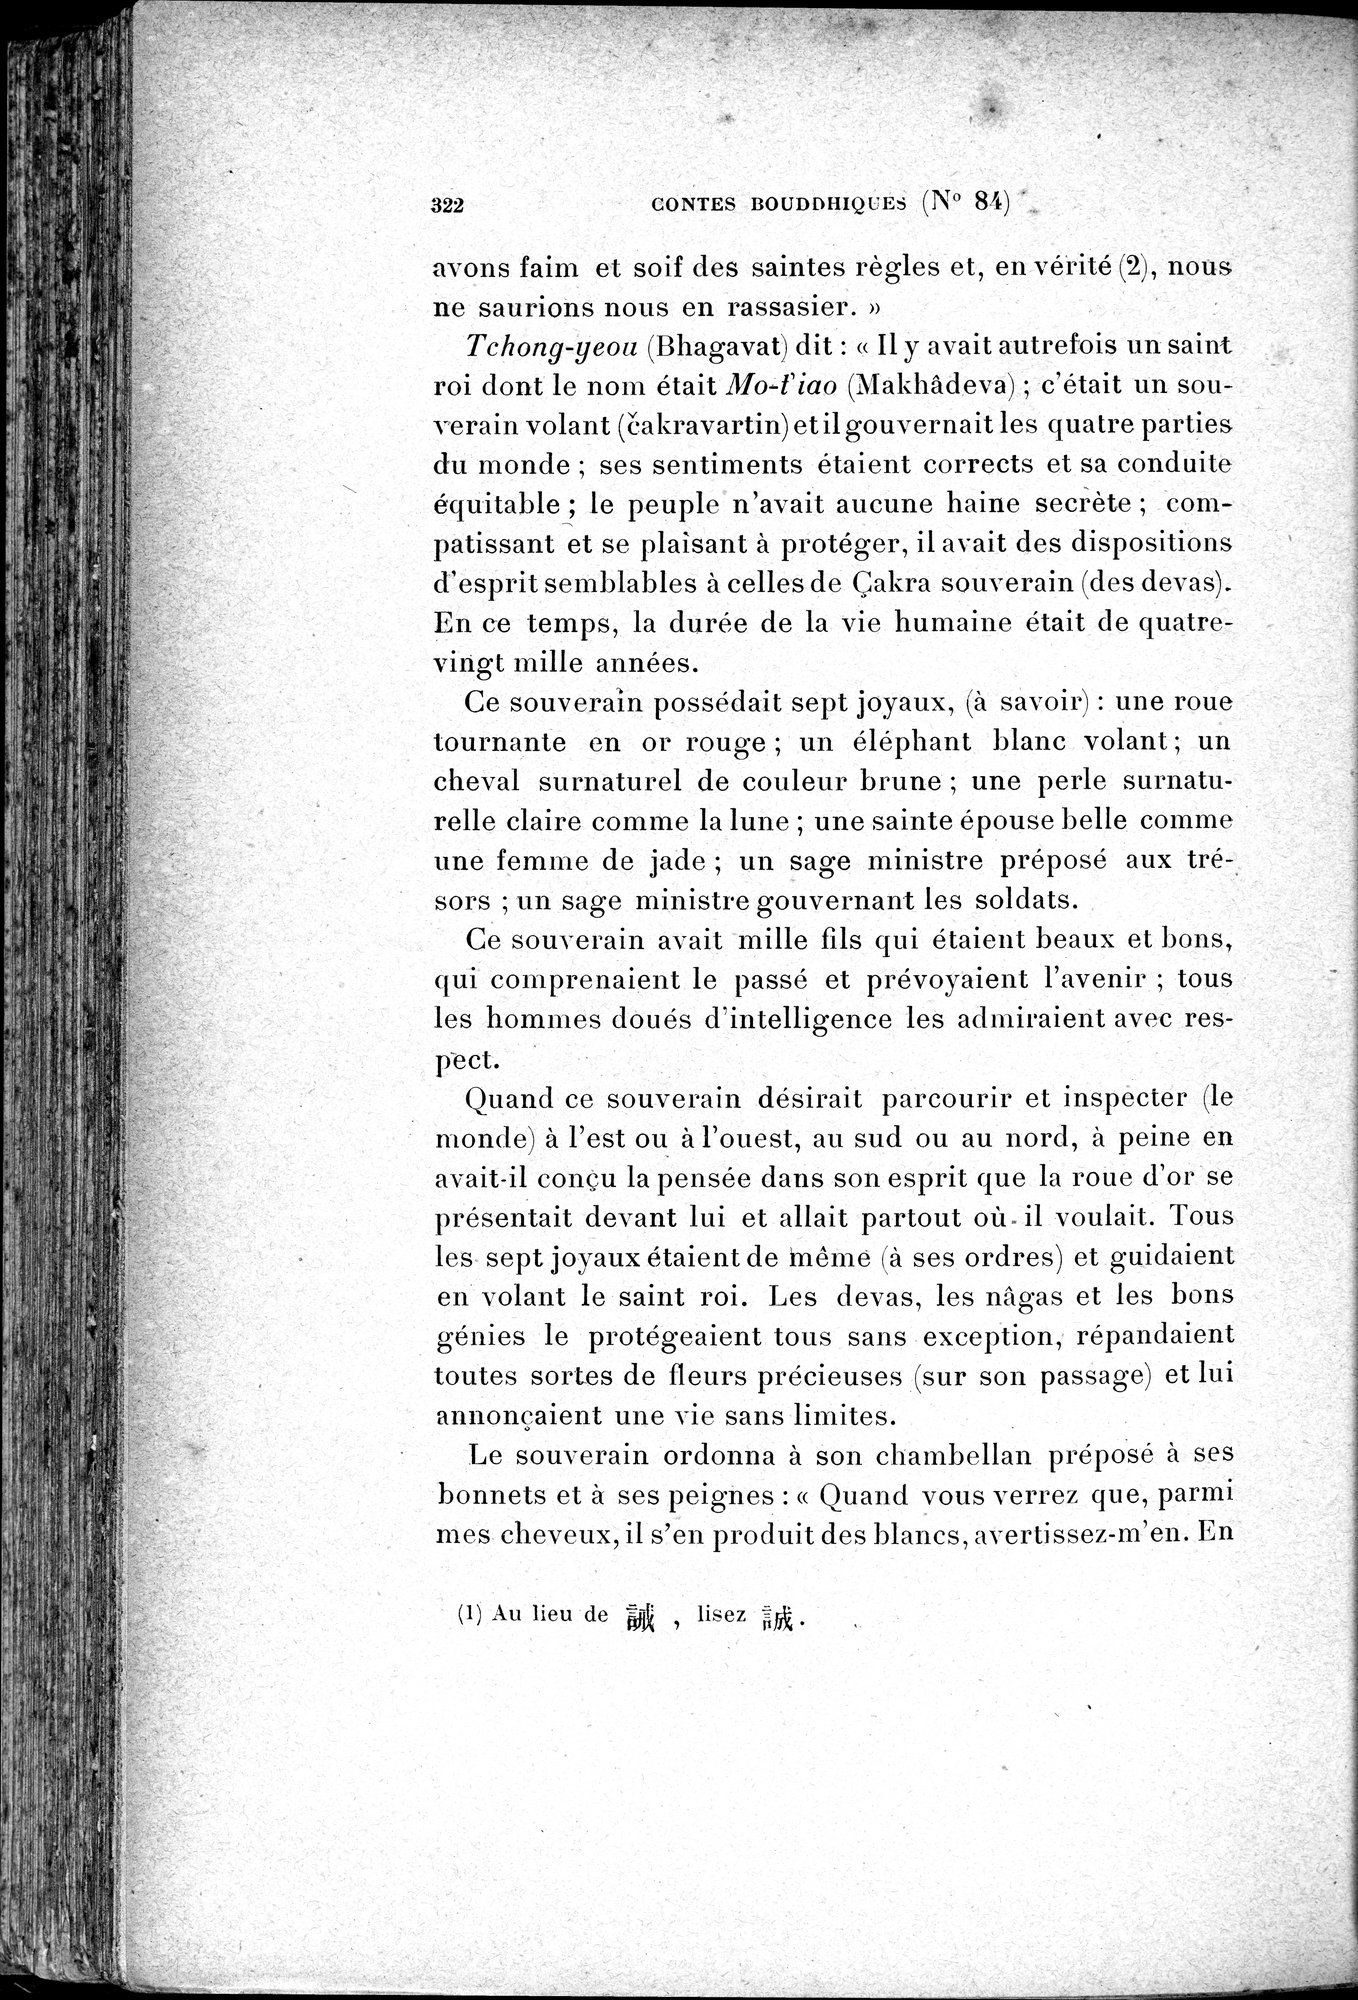 Cinq Cents Contes et Apologues : vol.1 / Page 356 (Grayscale High Resolution Image)